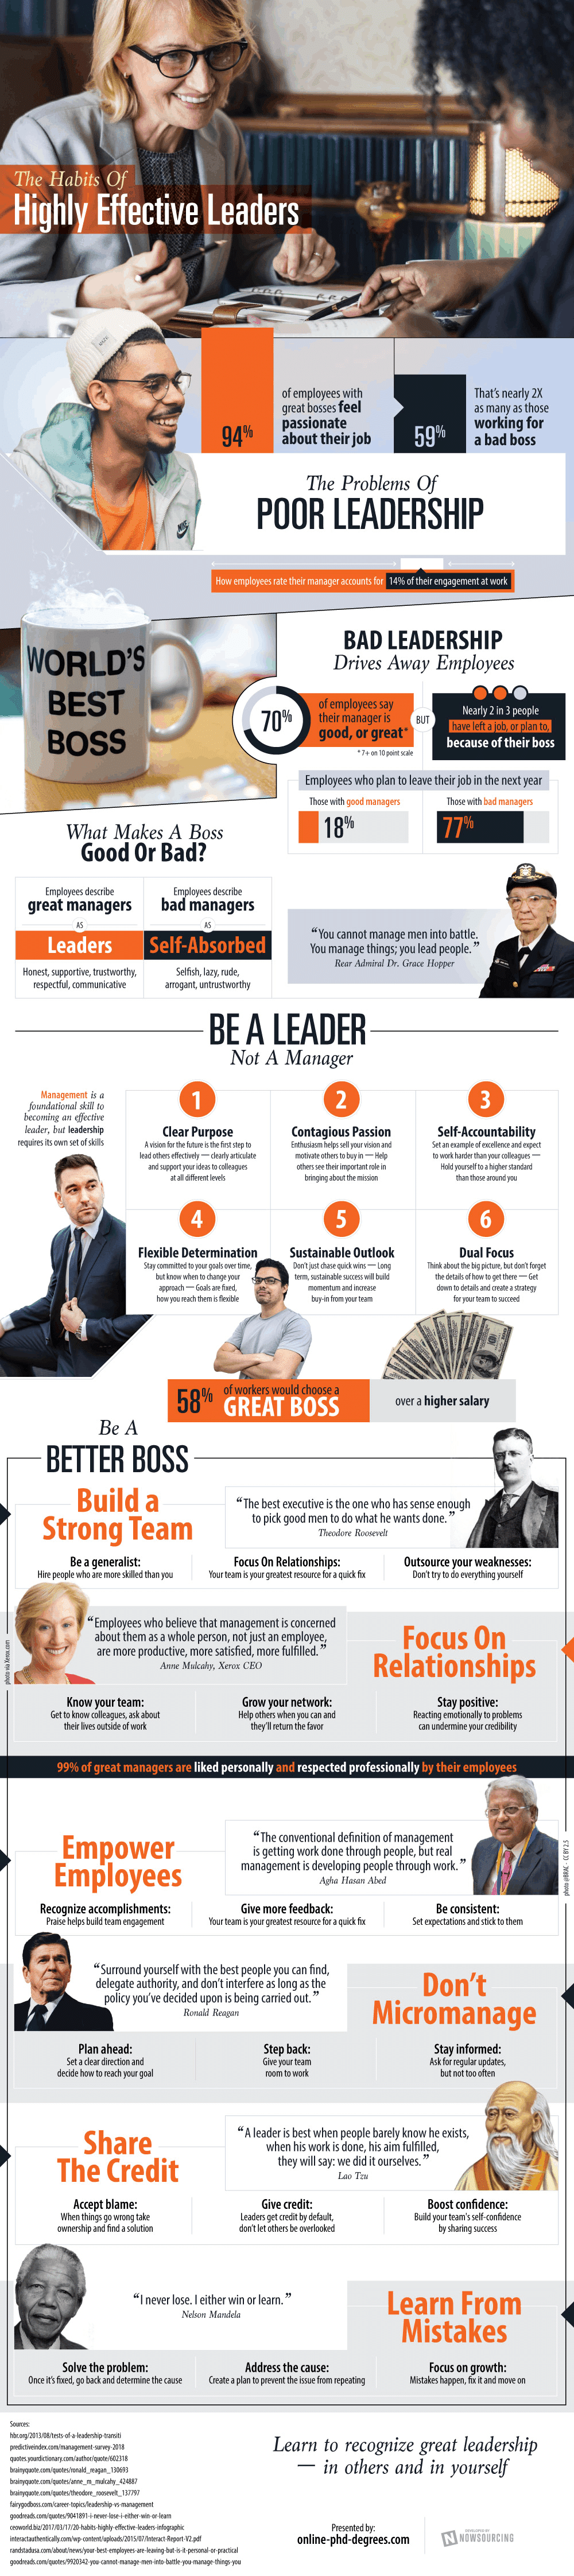 The Habits of Highly Effective Leaders